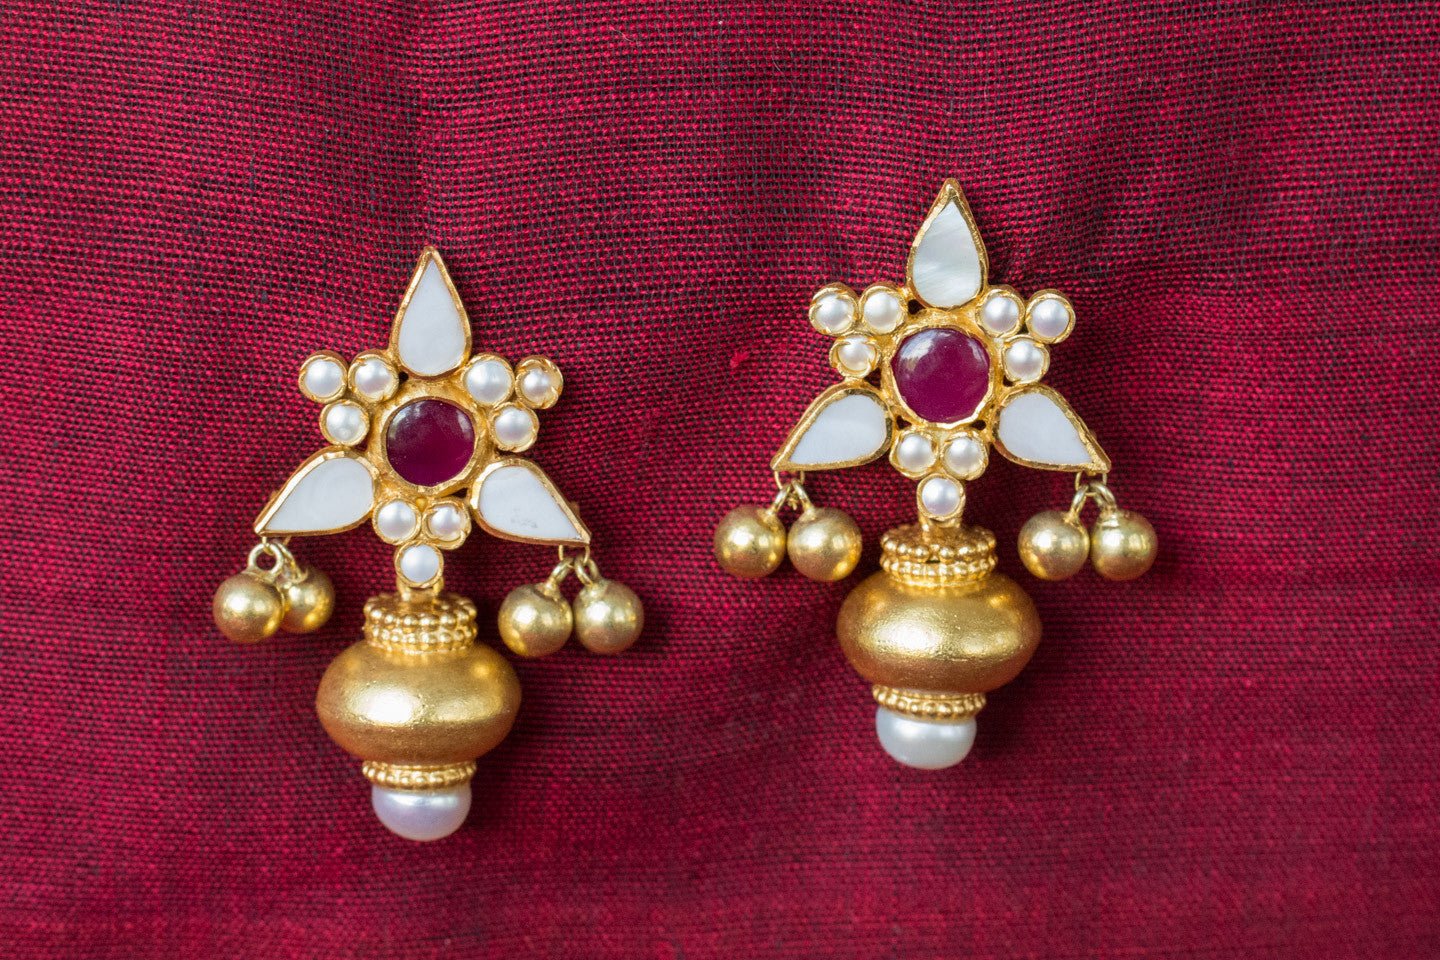 20a456-silver-gold-plated-amrapali-earrings-floral-top-pearl-glass